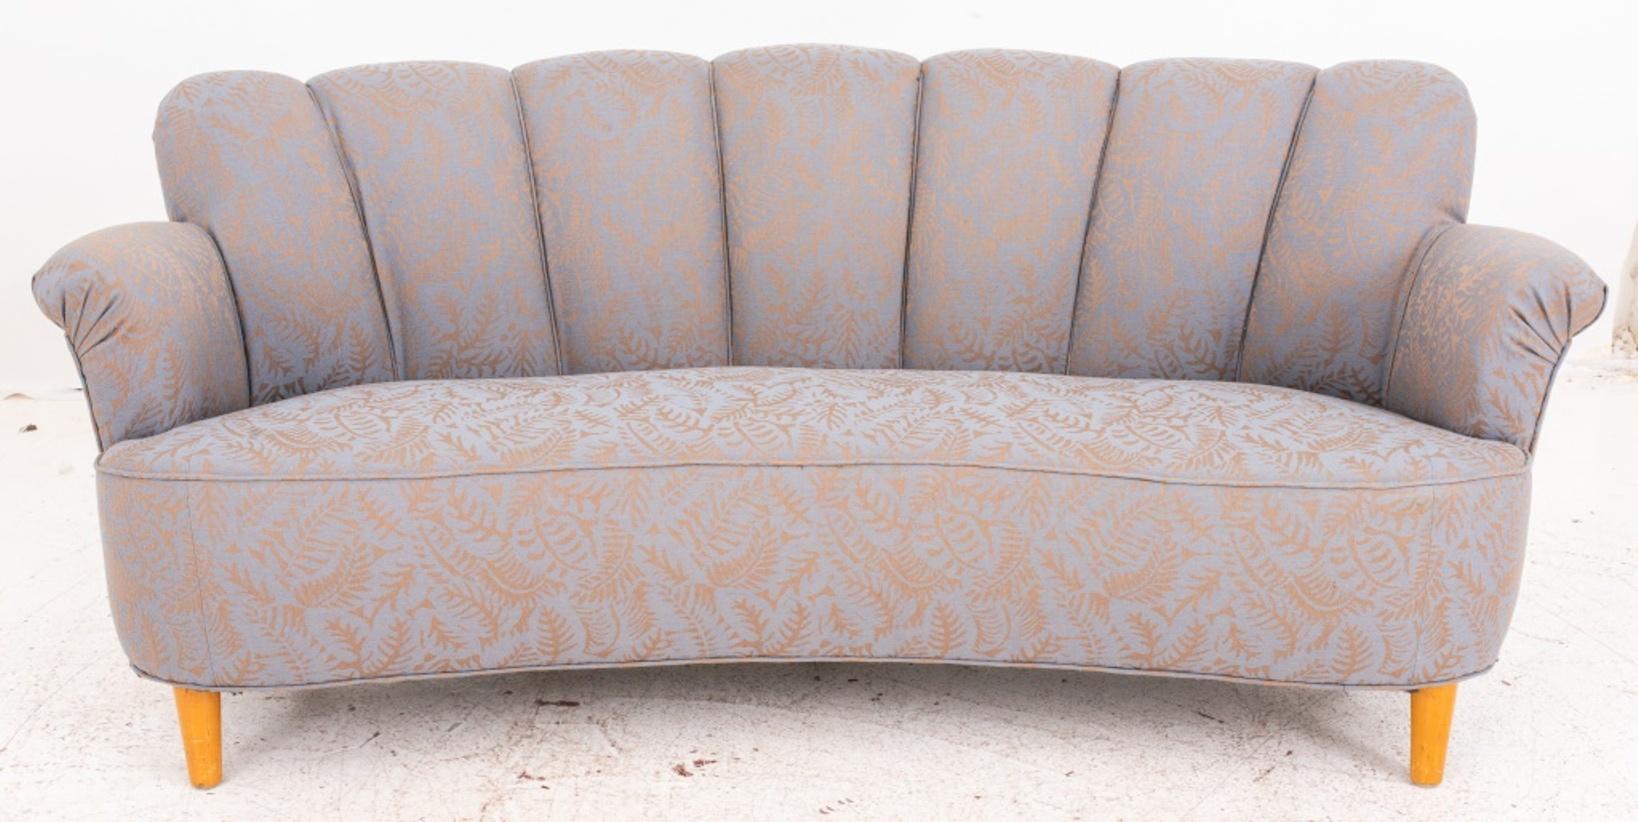 Vintage semicircular upholstered cocktail sofa with channeled 